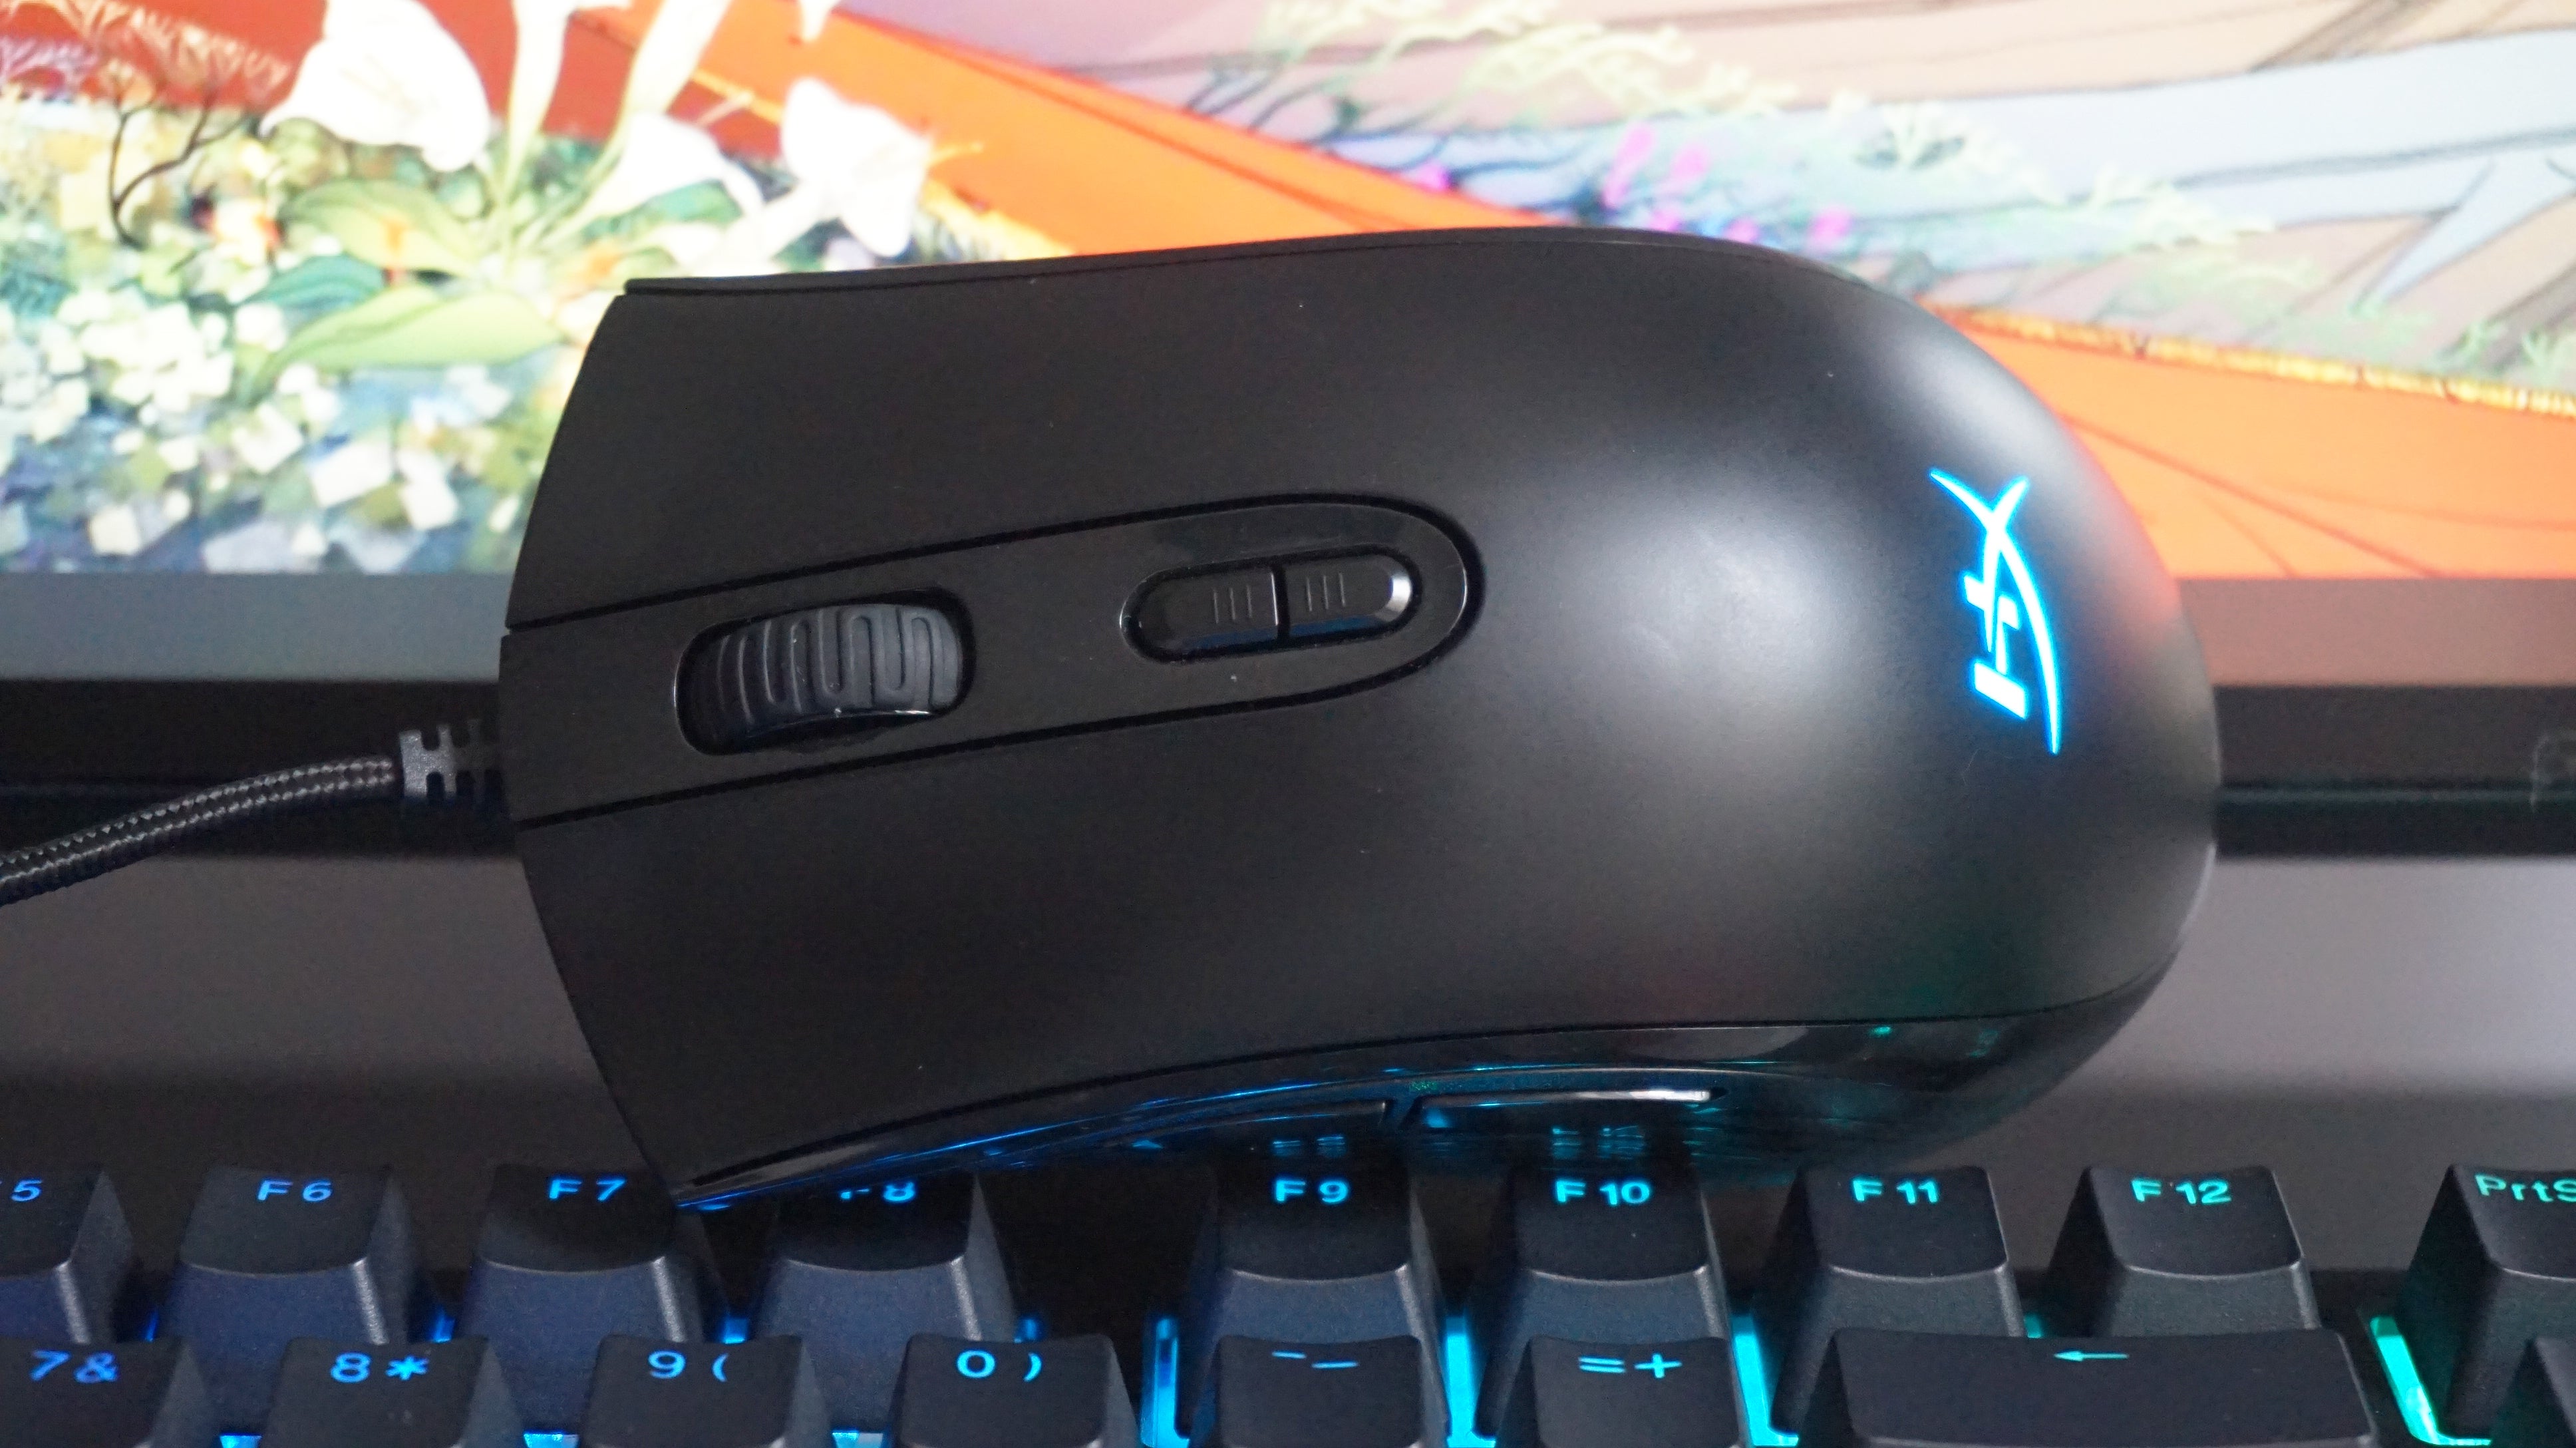 Image for HyperX Pulsefire Core review: A great budget gaming mouse